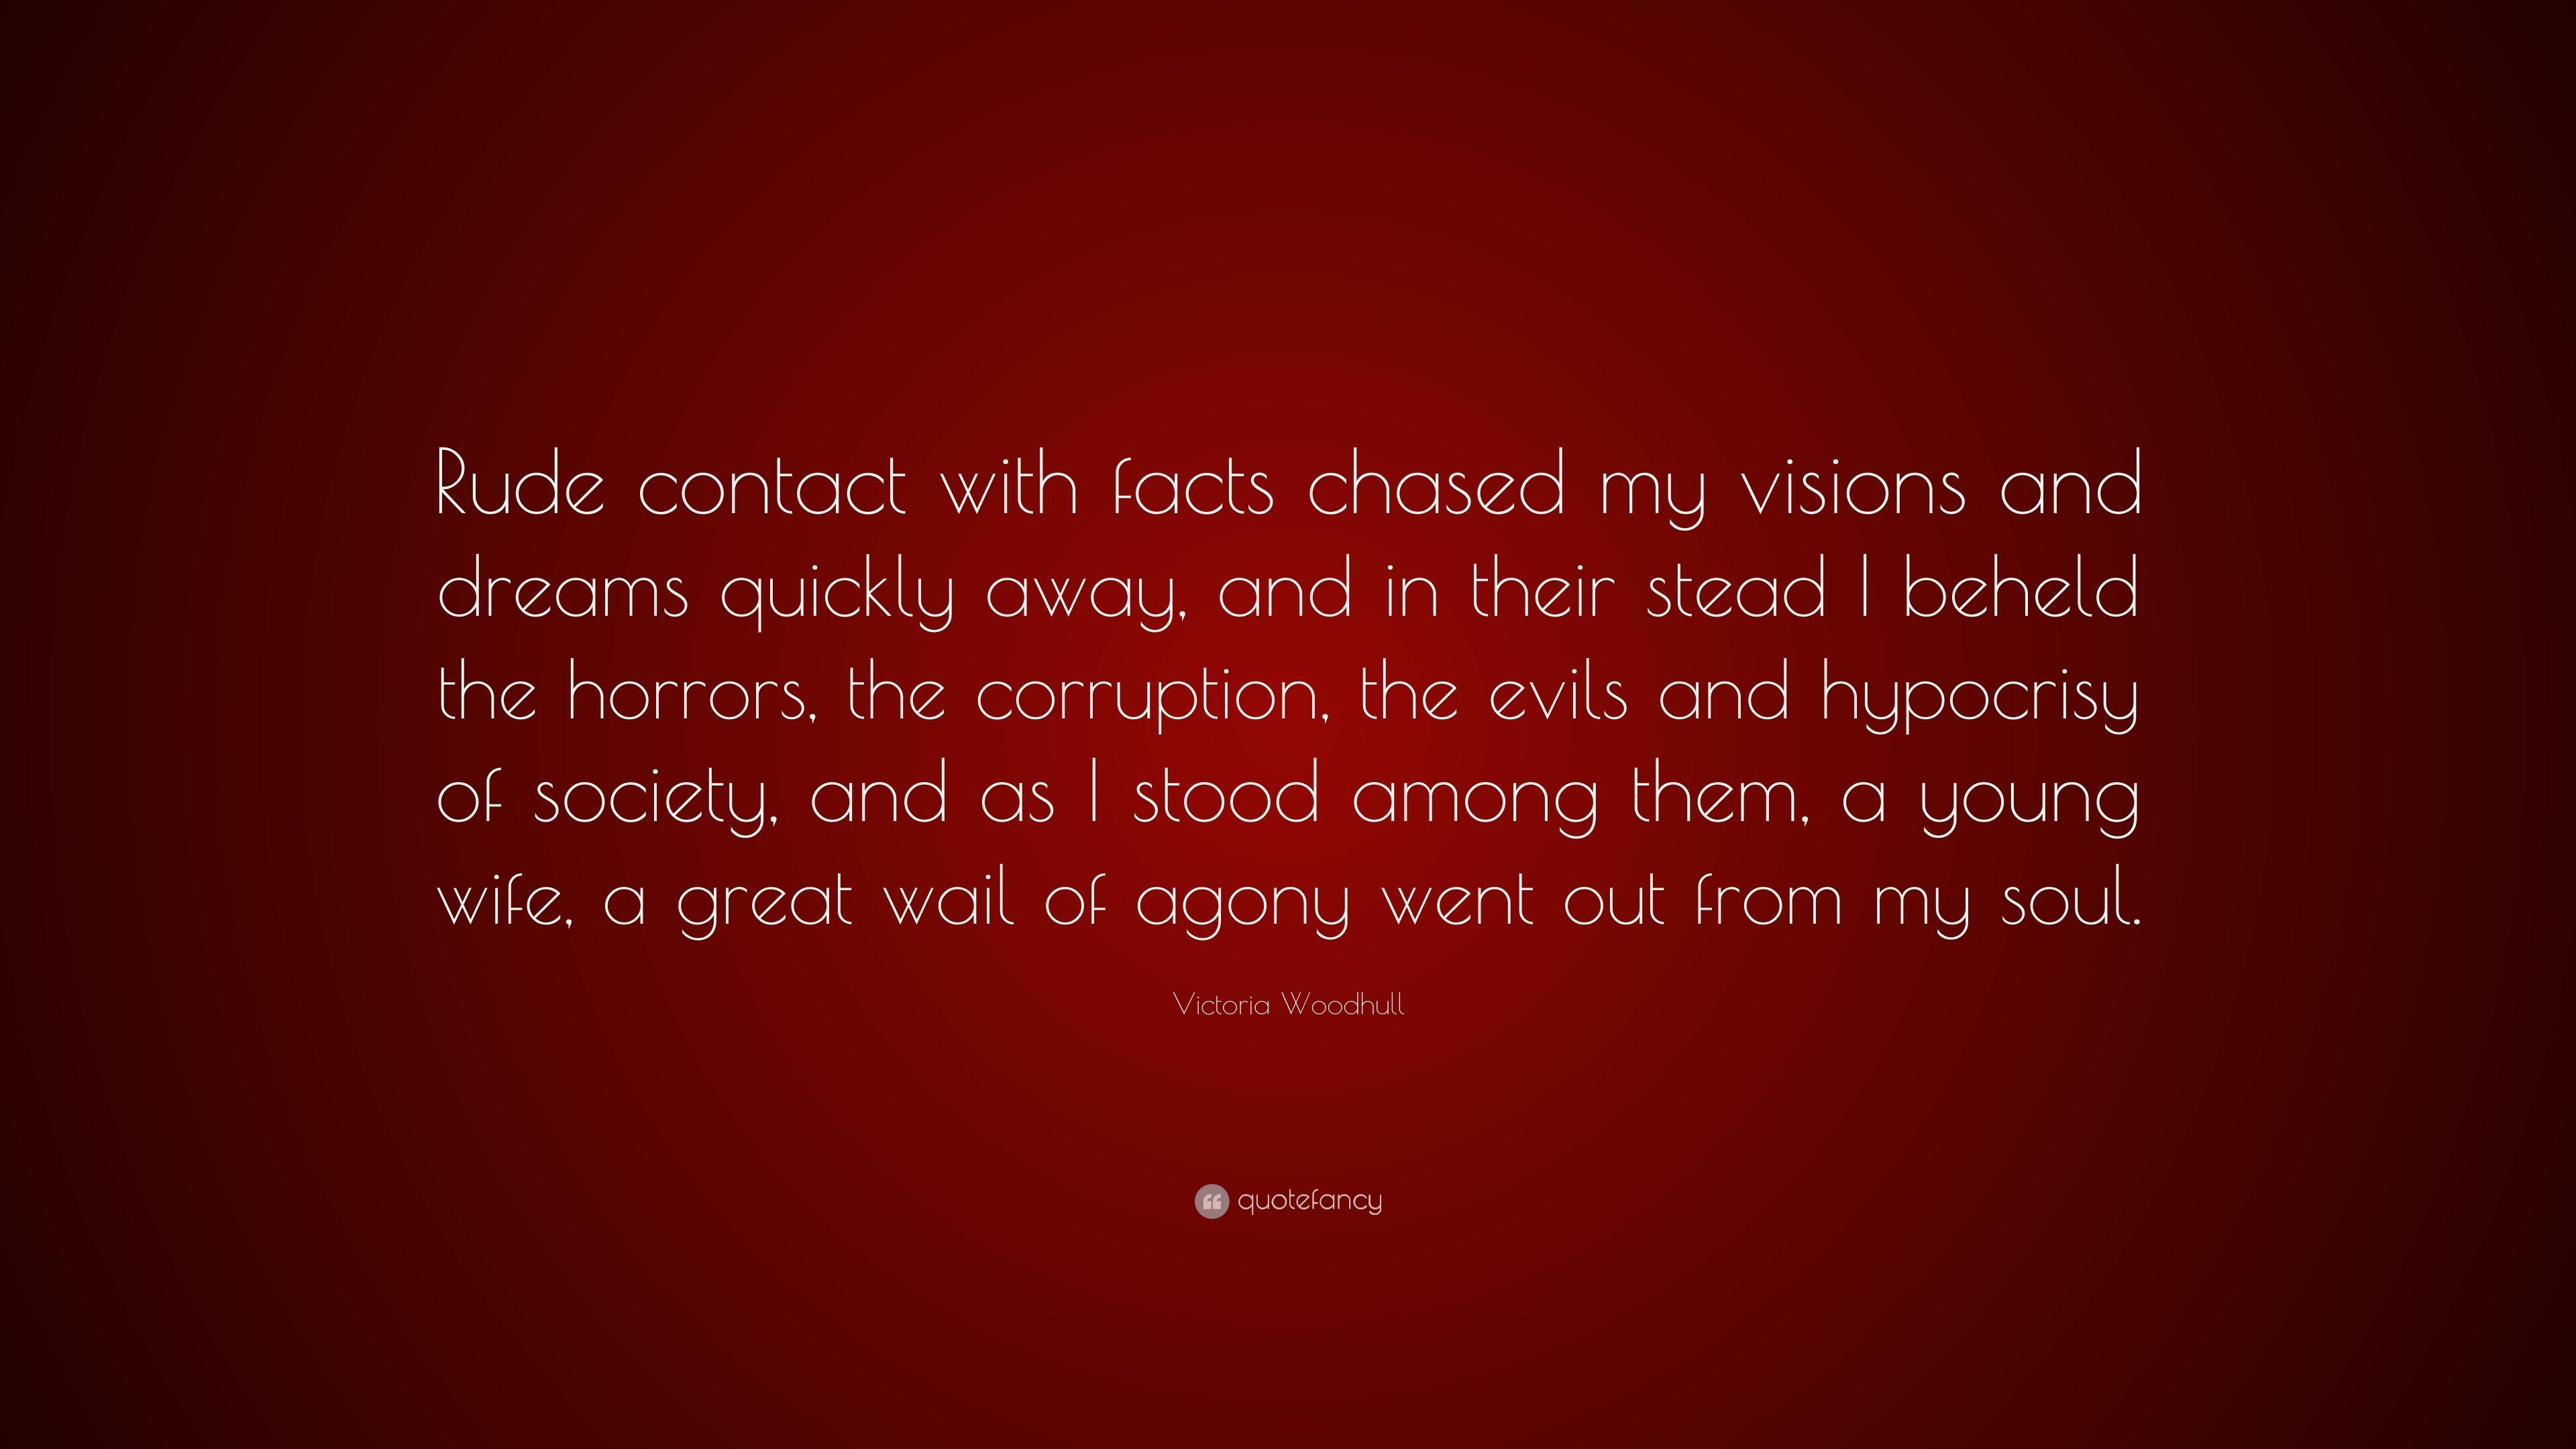 Victoria Woodhull Quote: “Rude contact with facts chased my